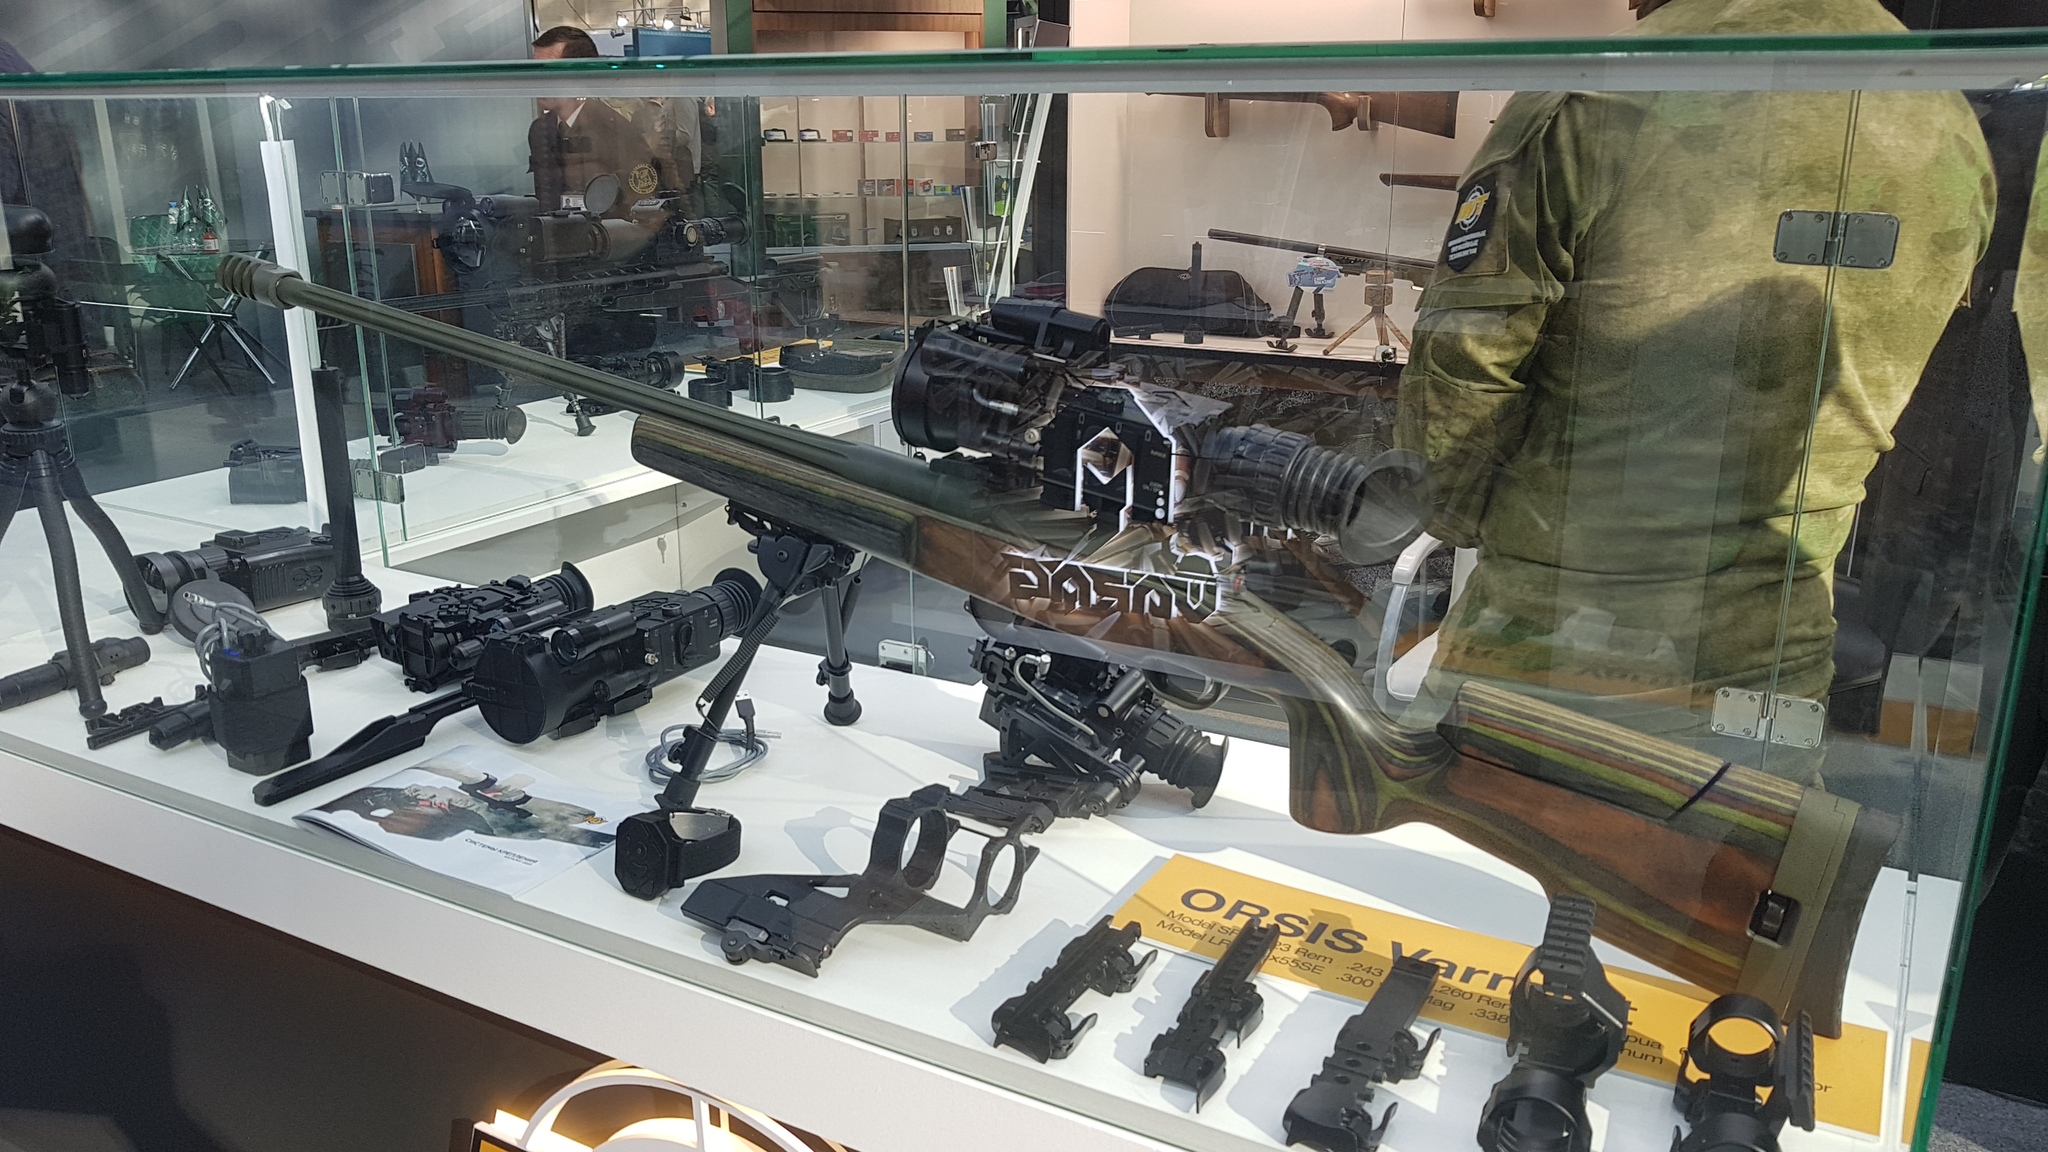 A few photos from the weapons exhibition eagle expo 2022 - My, Weapon, Firearms, Moscow, Gostiny Dvor, Gun, Sniper rifle, Rifle, Assault rifle, Longpost